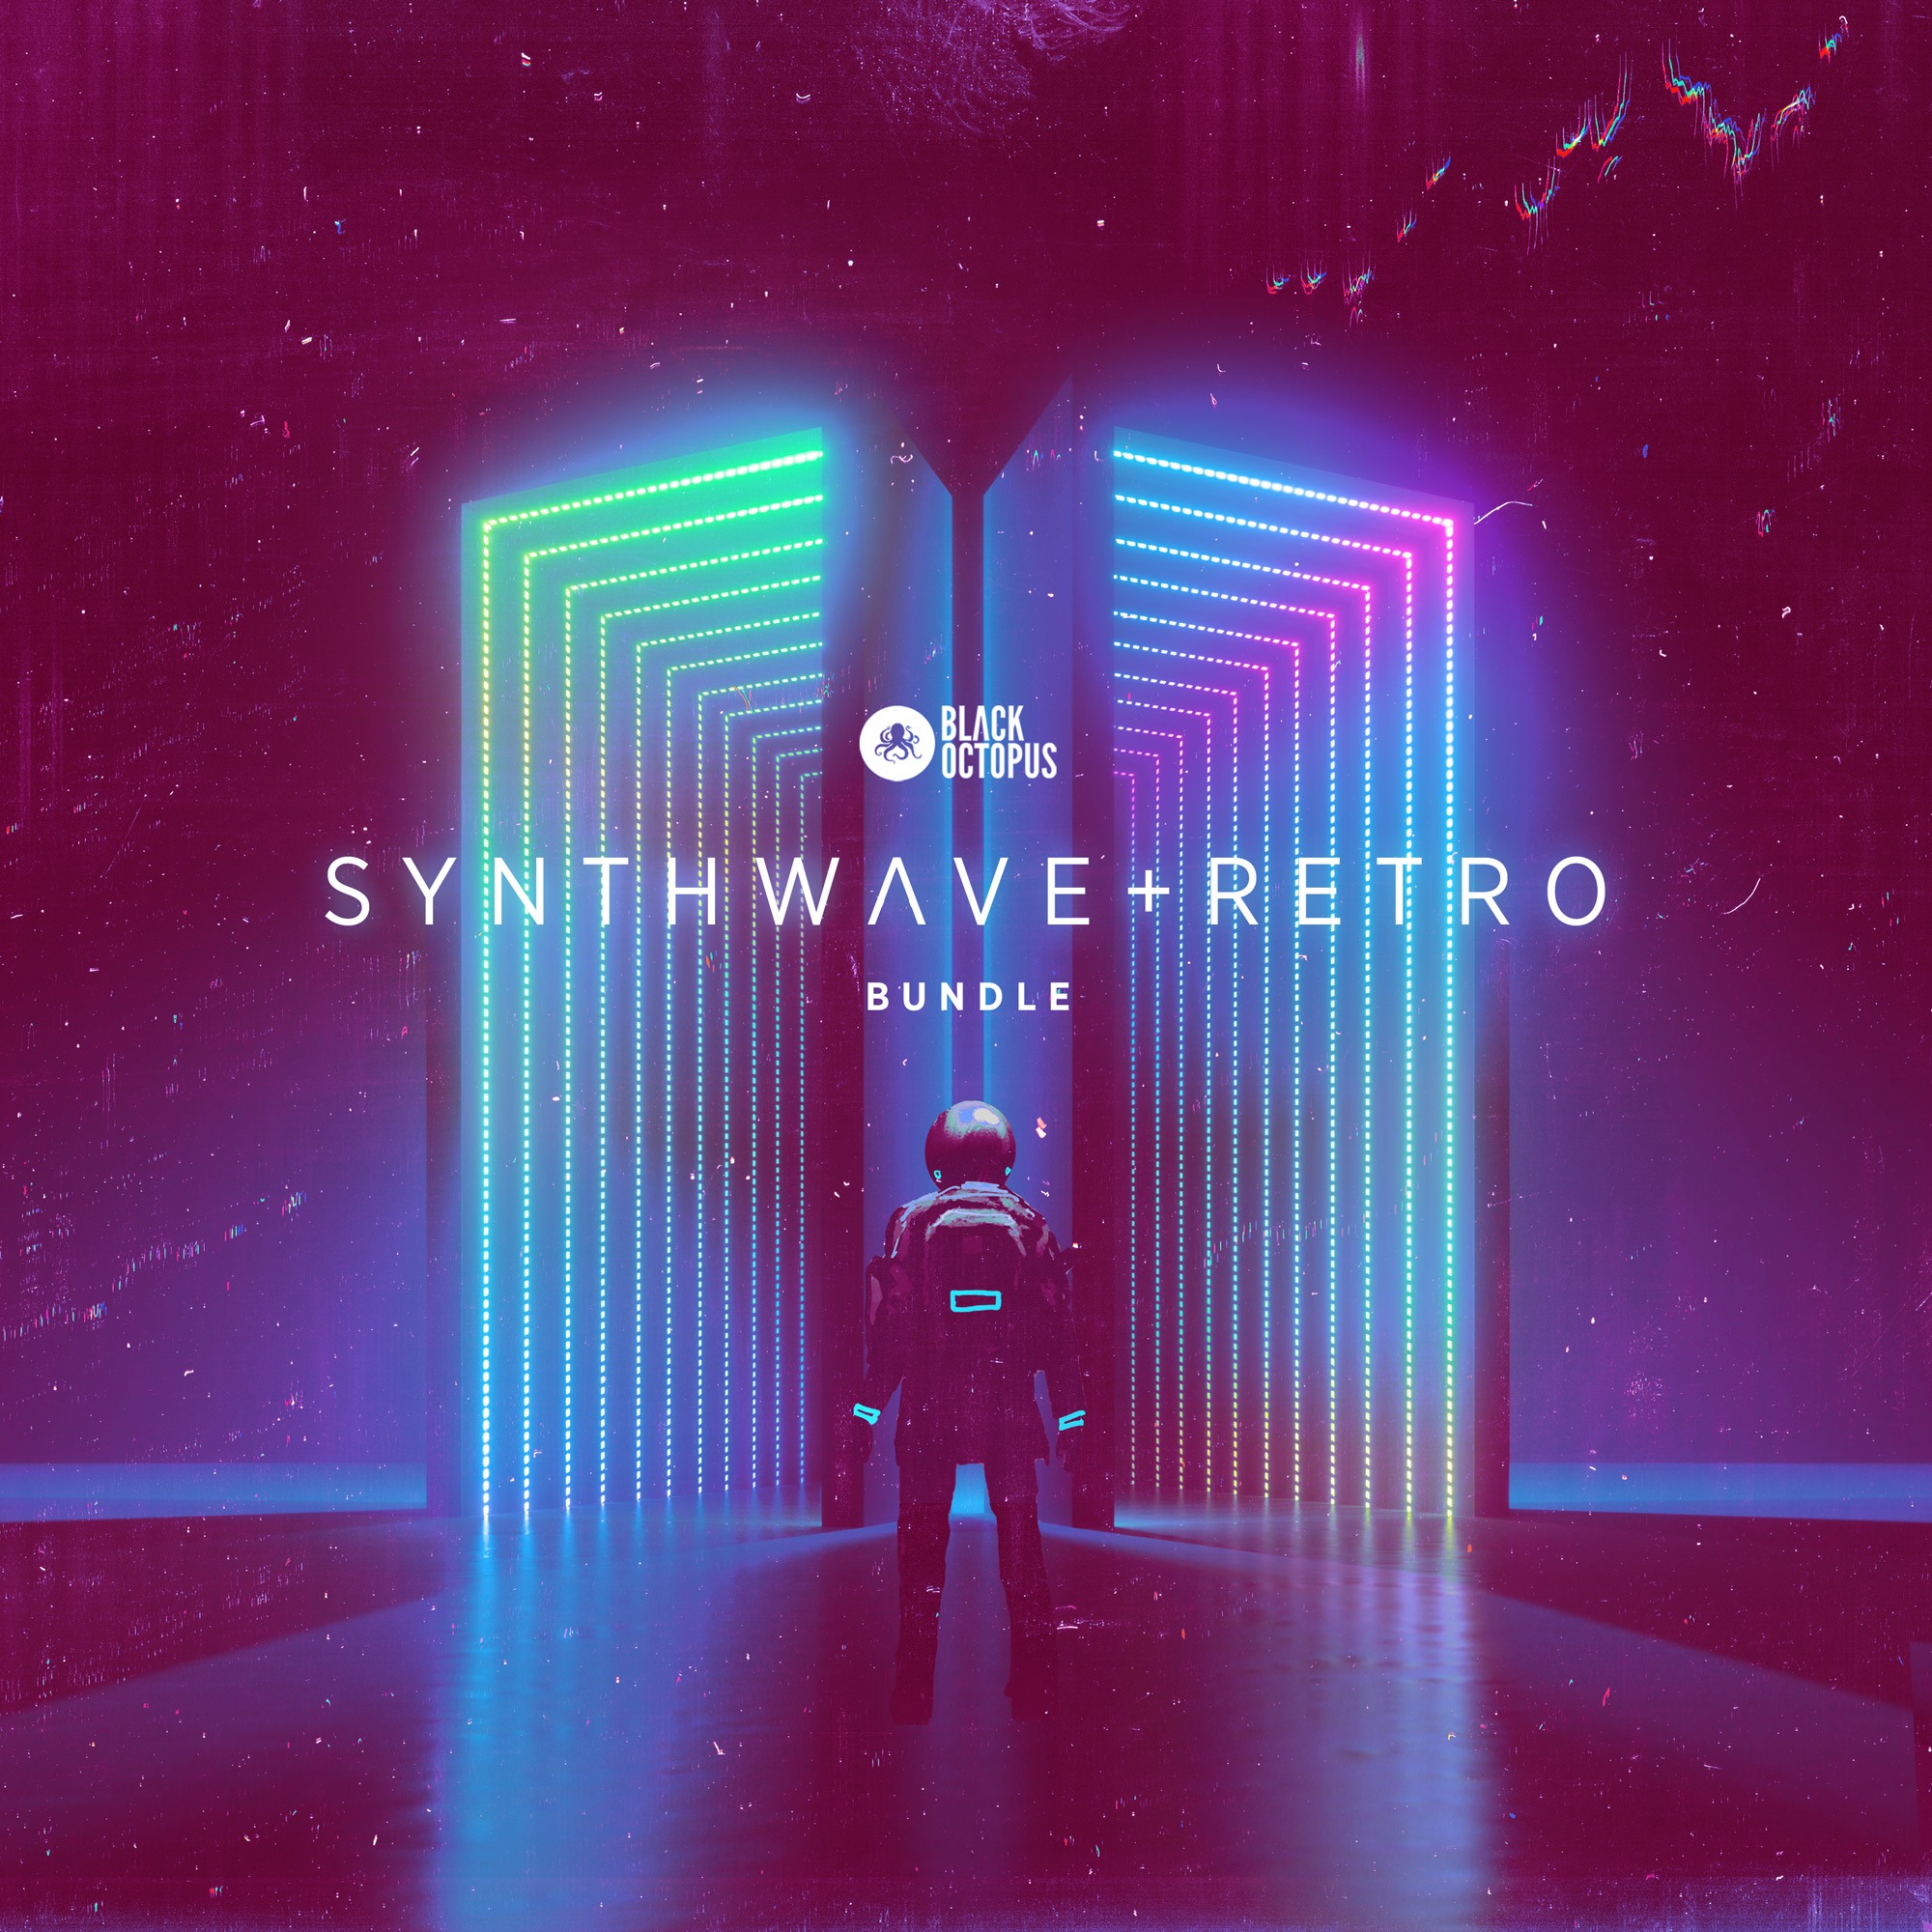 Synthwave-and-Retro-Bundle-APD.jpg